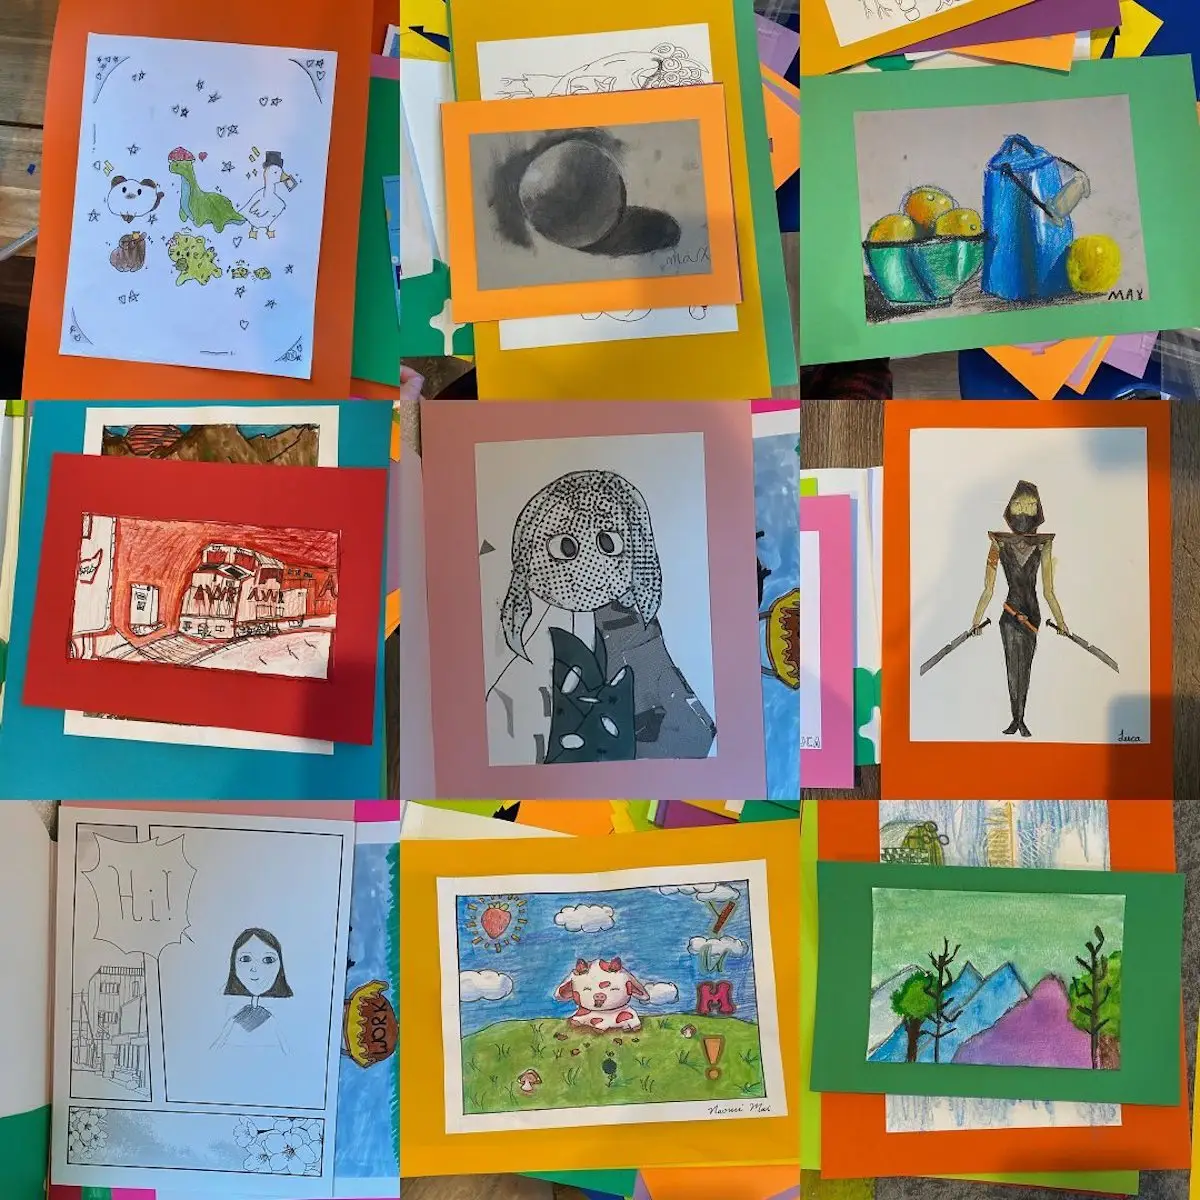 Children's pictures made at Creative Cave arts summer camp in Mill Valley